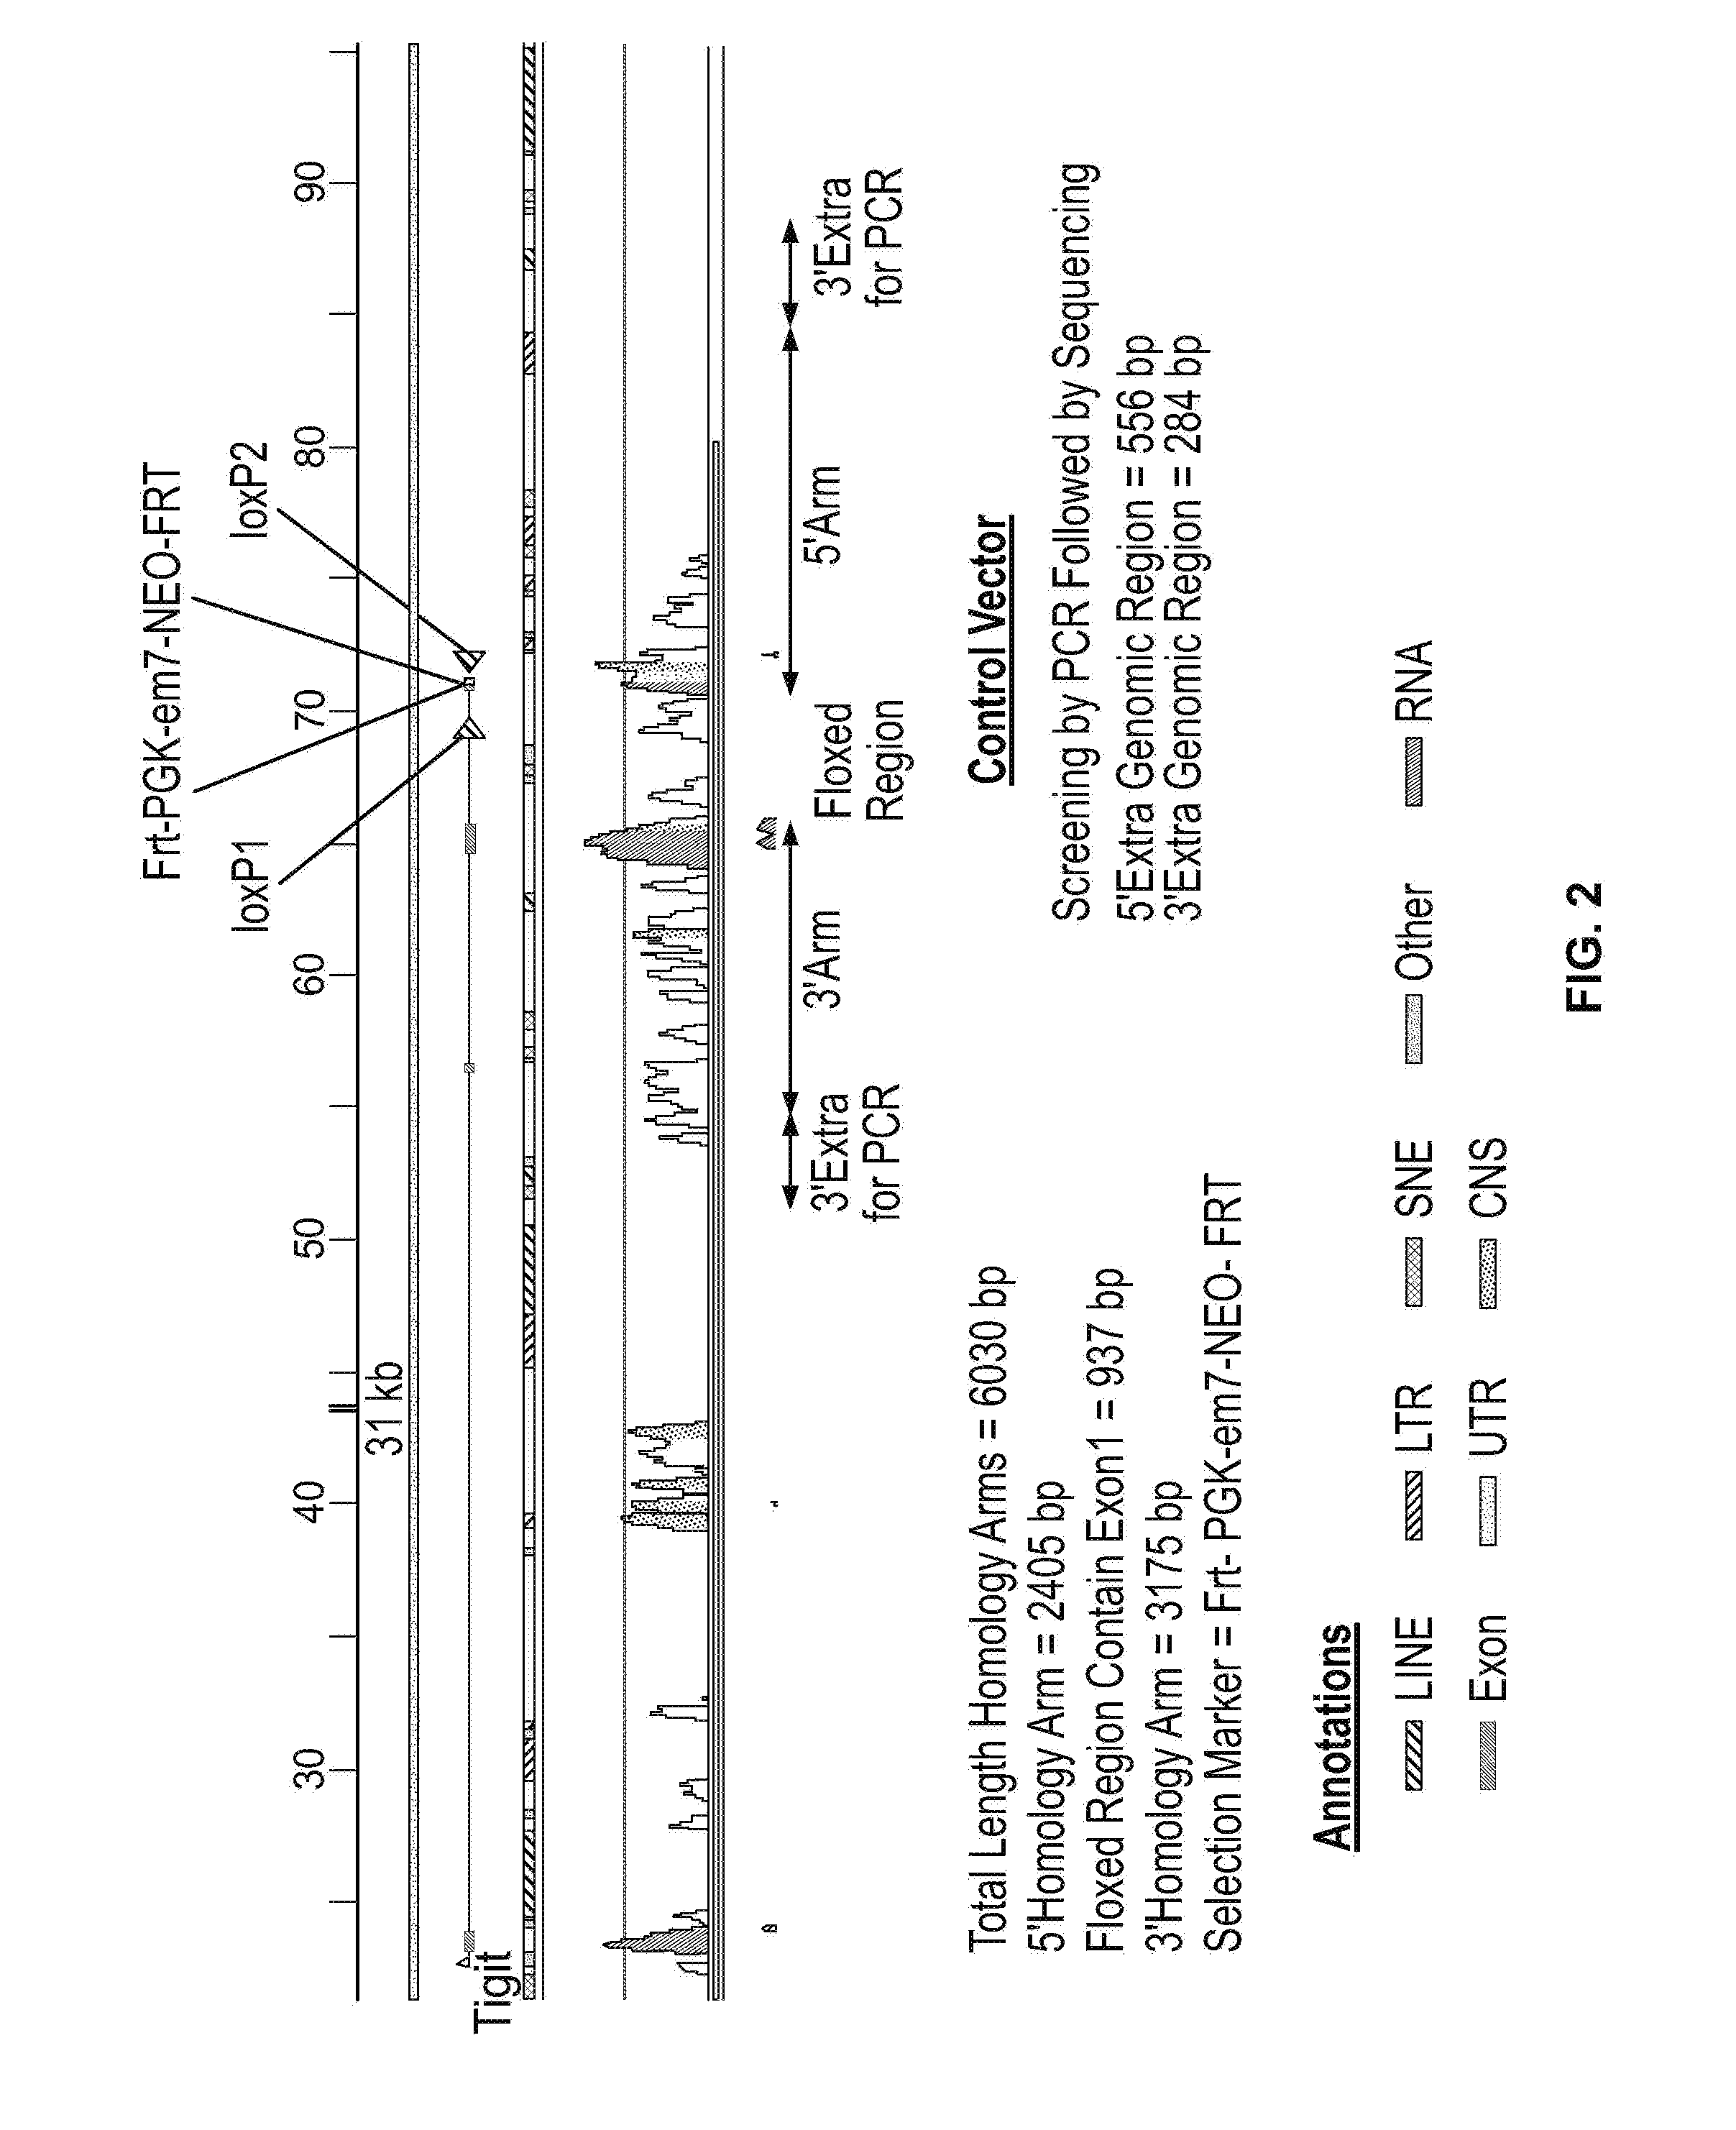 Methods of treating cancer using pd-1 axis binding antagonists and tigit inhibitors